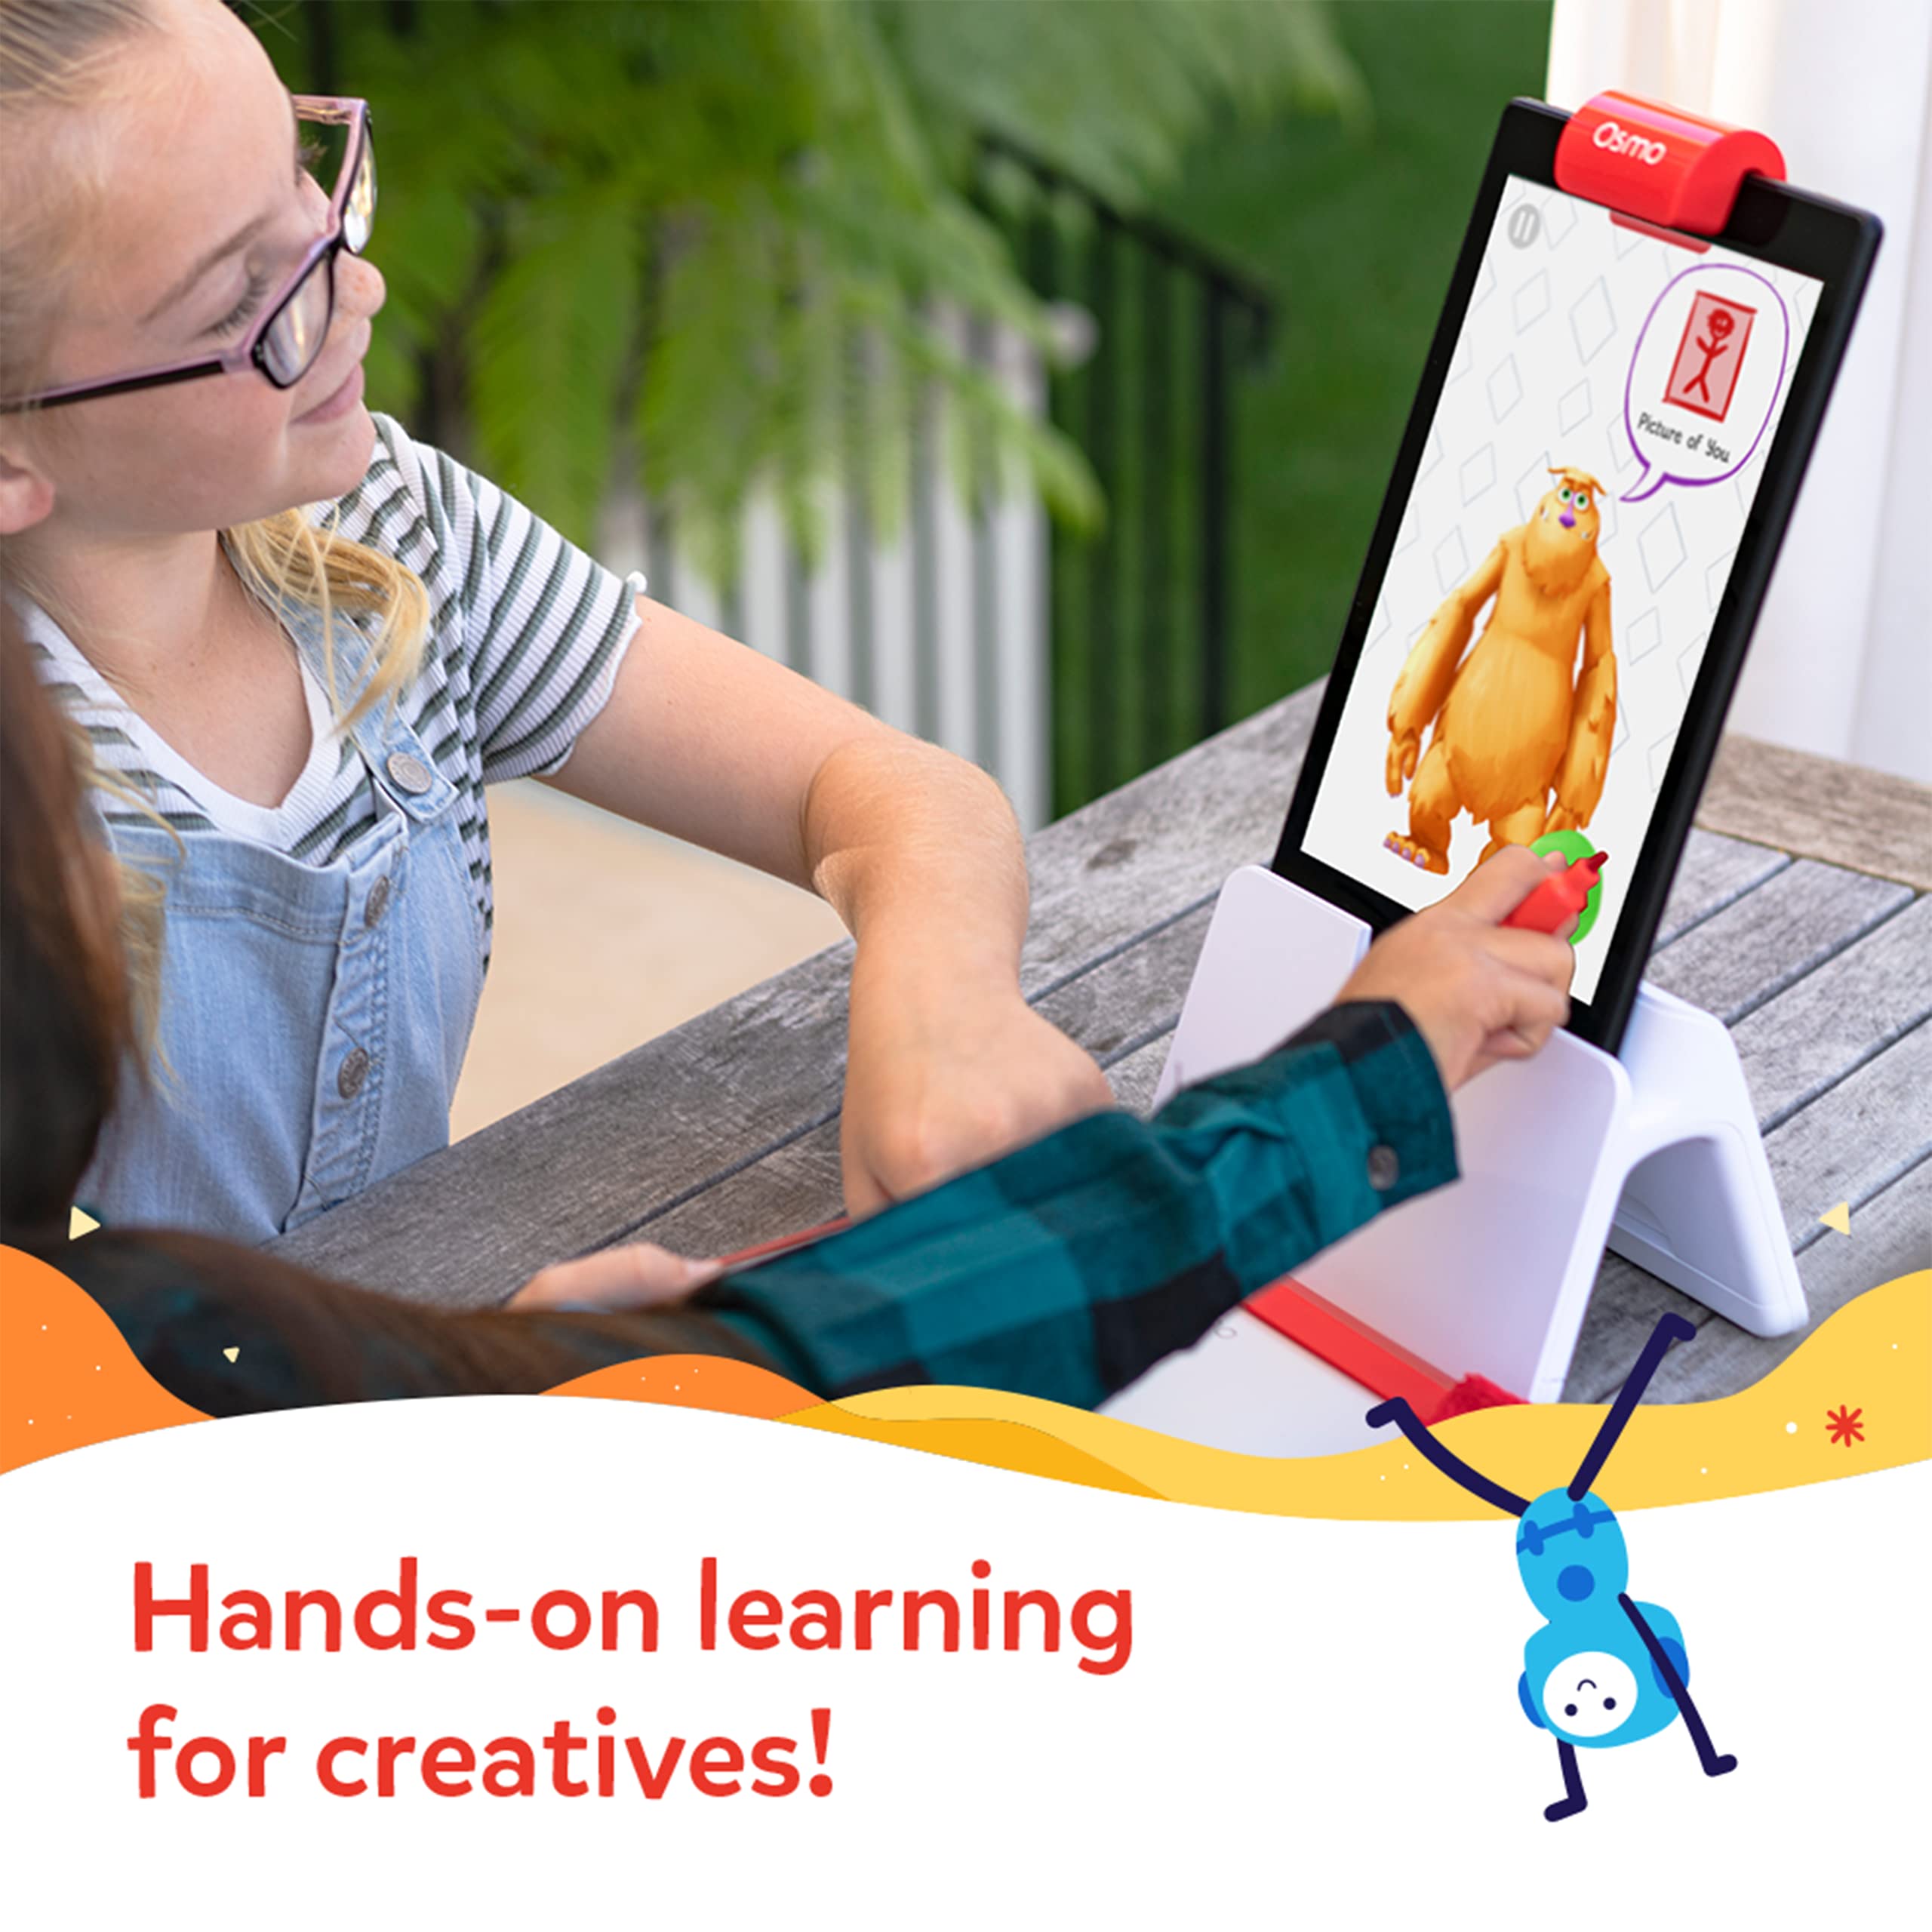 Osmo - Creative Starter Kit for Fire Tablet-3 Educational Learning Games-Ages 5-10-Creative Drawing & Problem Solving/Early Physics-STEM Toy Gifts-Kids(Osmo Fire Tablet Base Included-Amazon Exclusive)